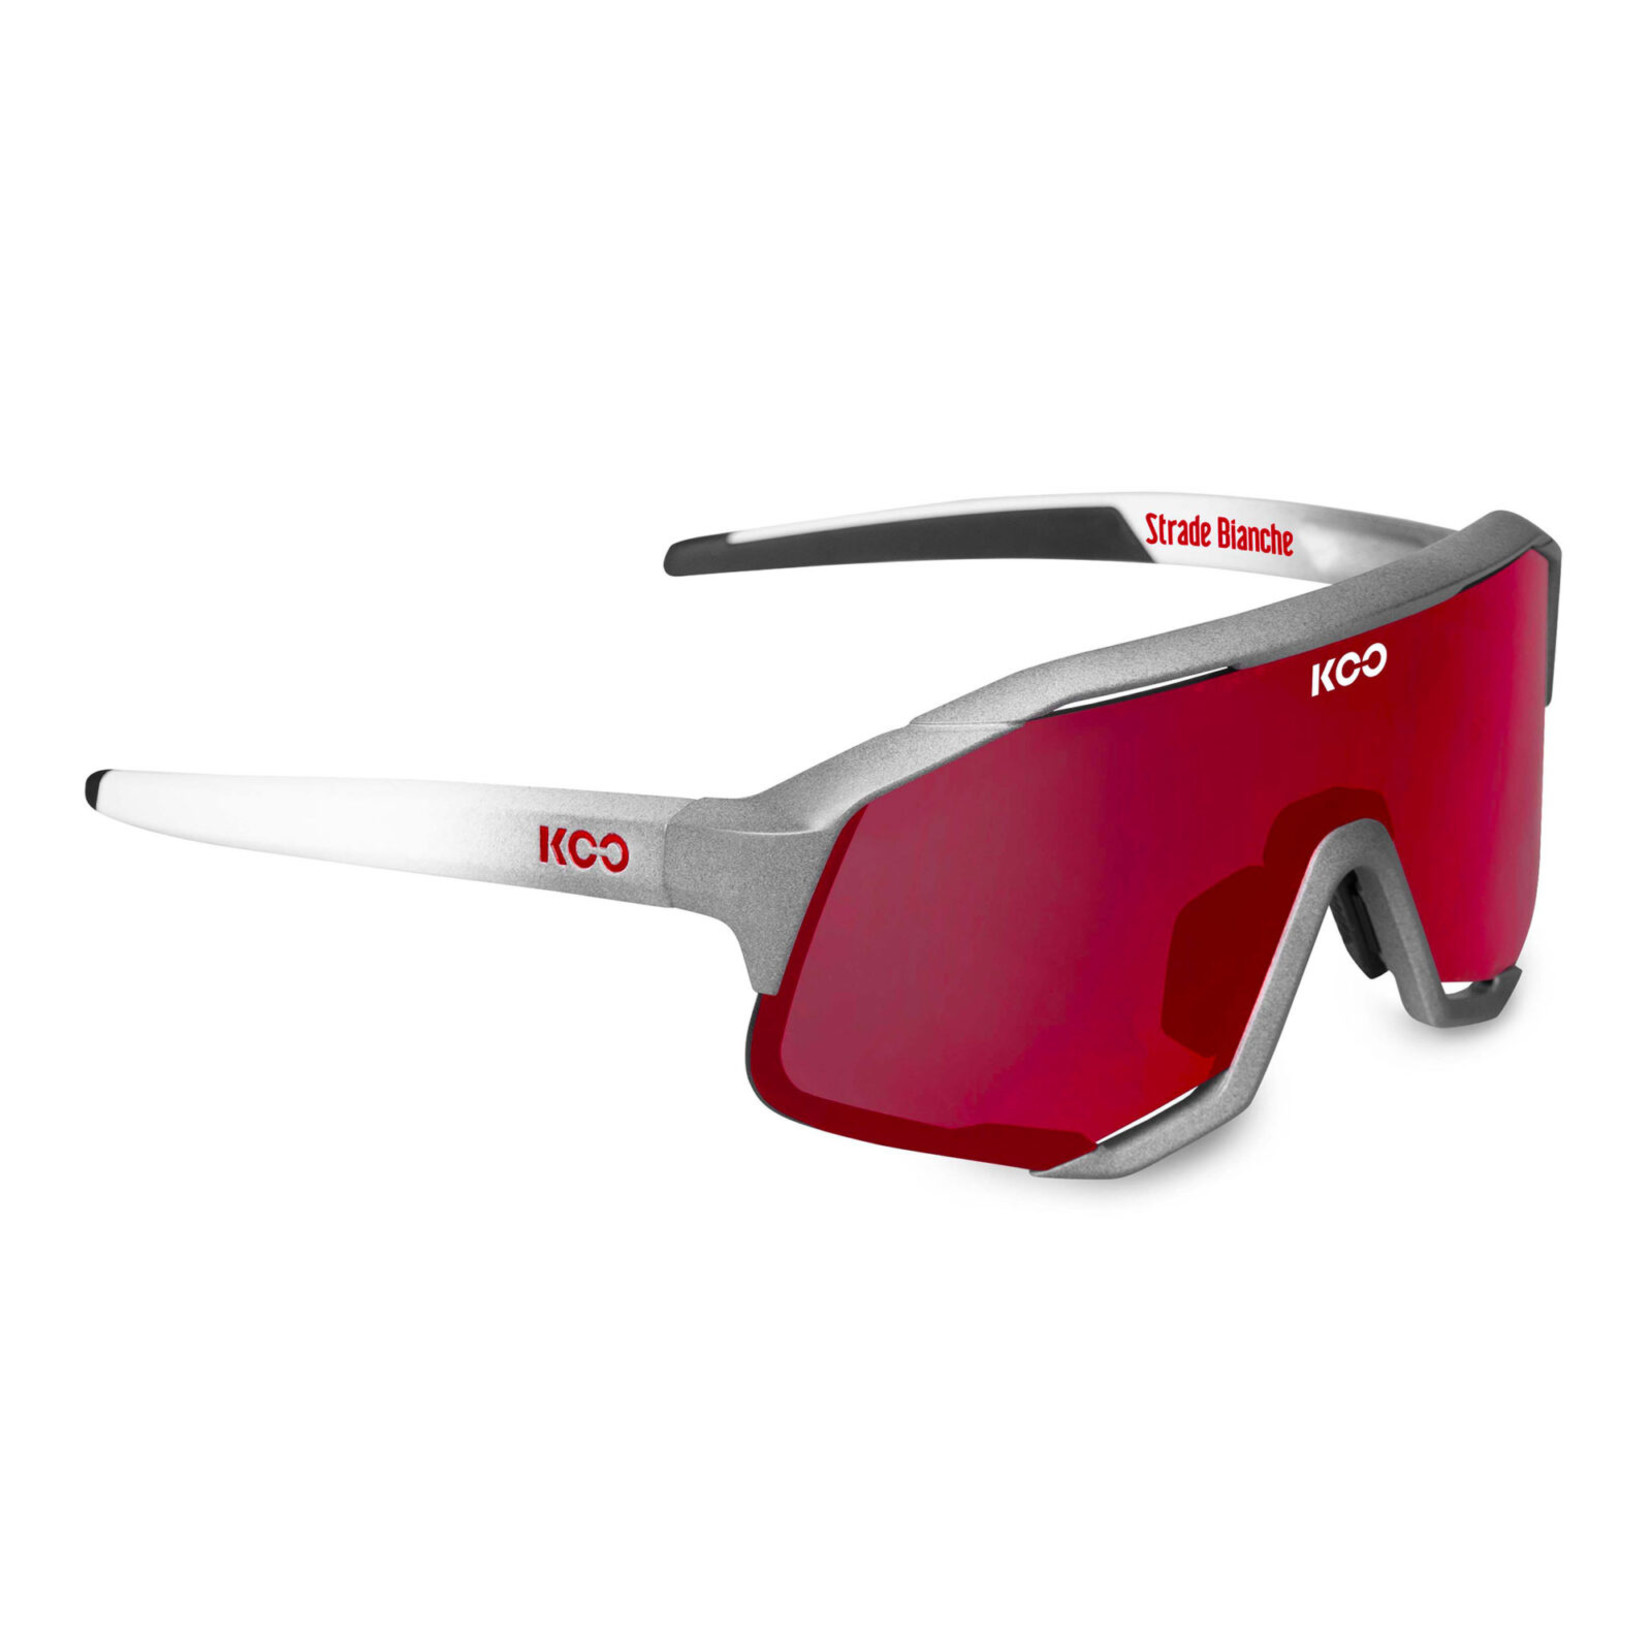 KOO Strade Blanche Dust/silena red